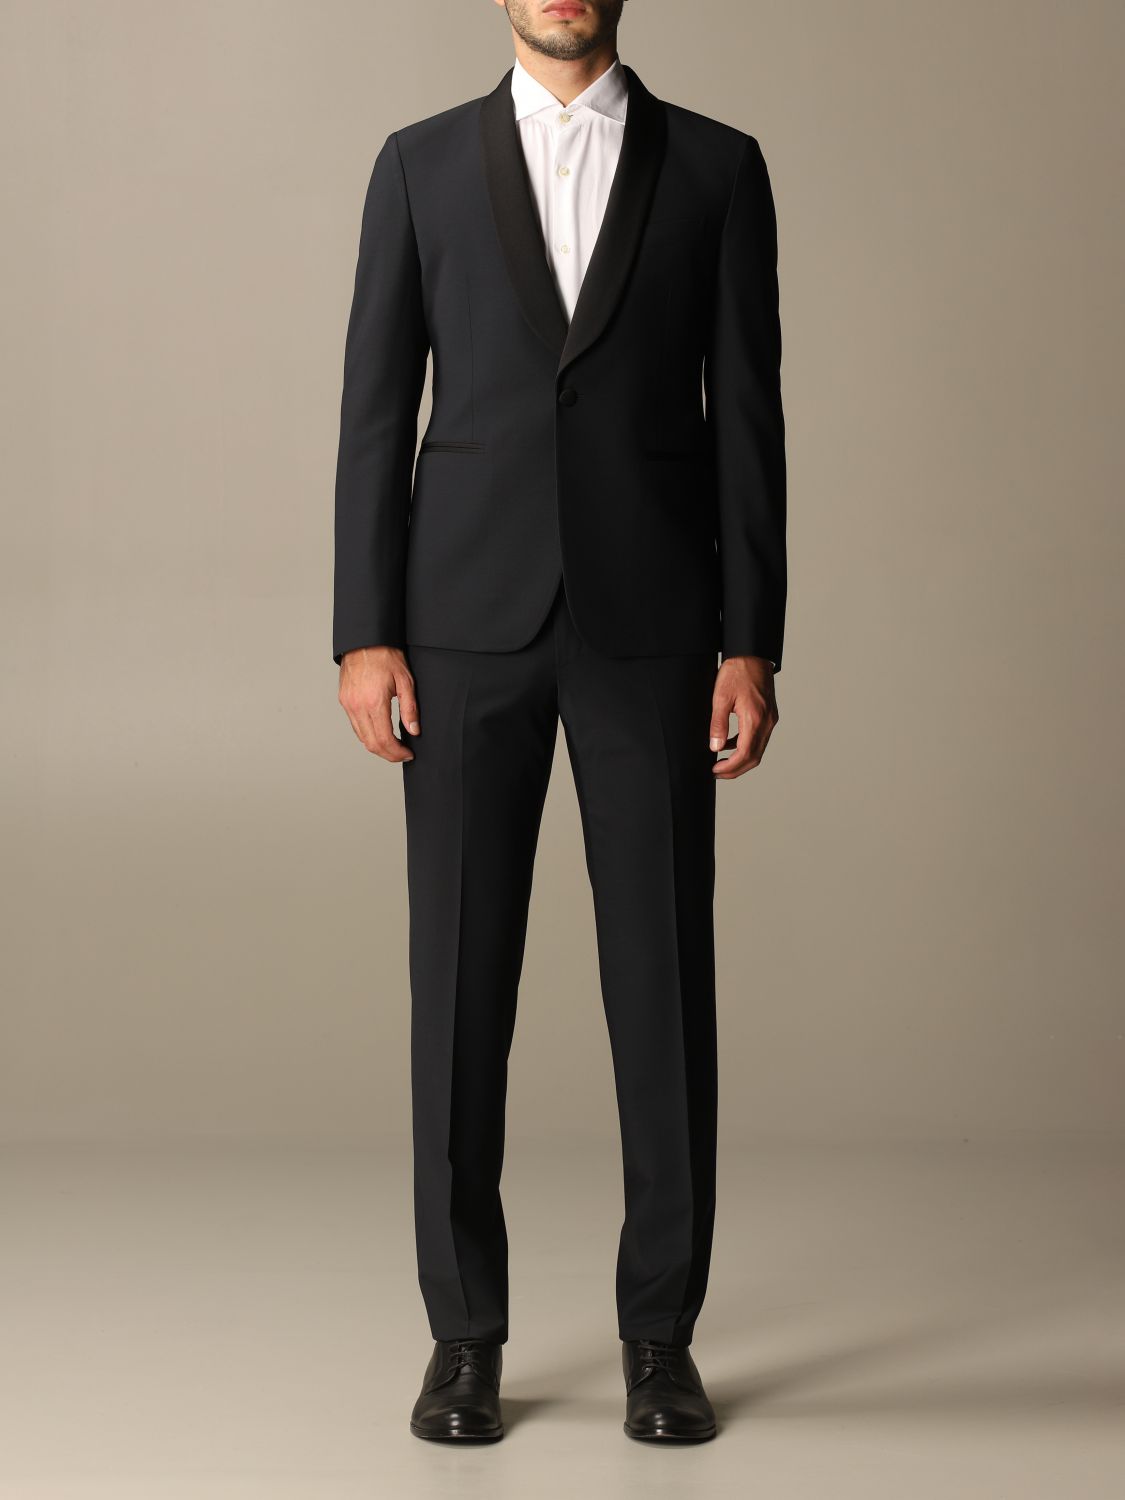 Gran Sasso Outlet: Classic single-breasted suit - Blue | Gran Sasso ...